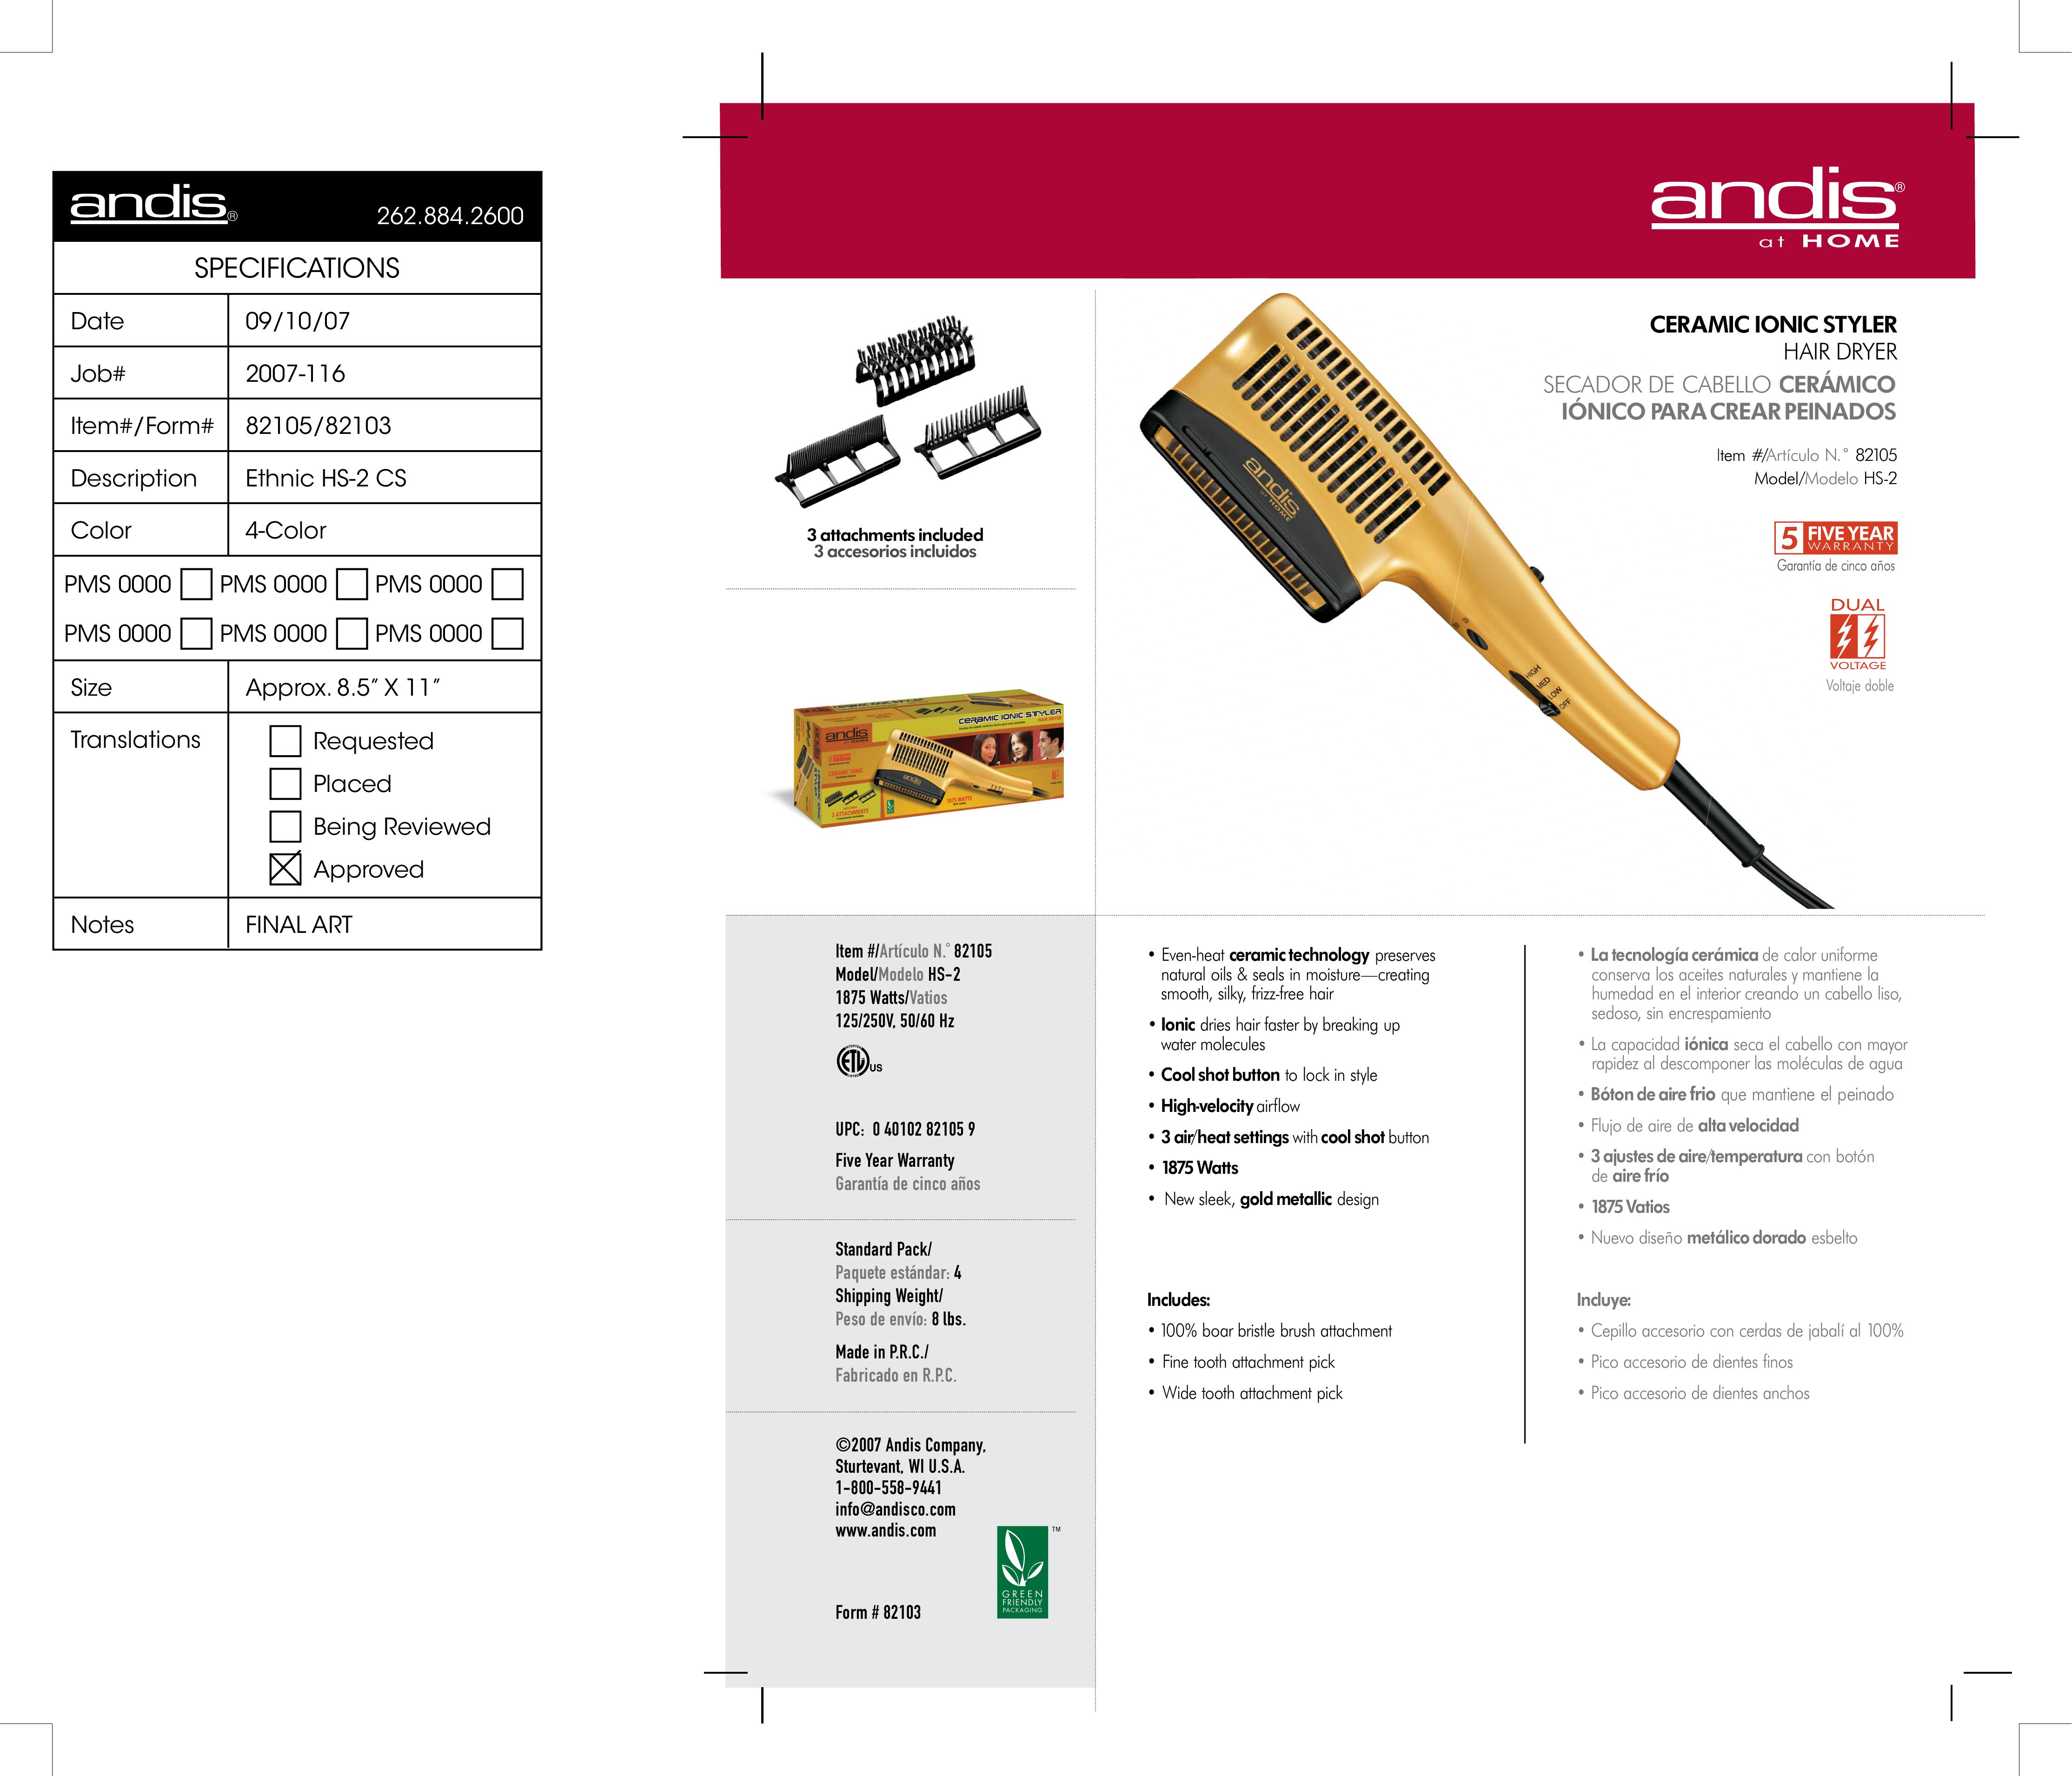 Andis Company HS-2 Hair Dryer User Manual